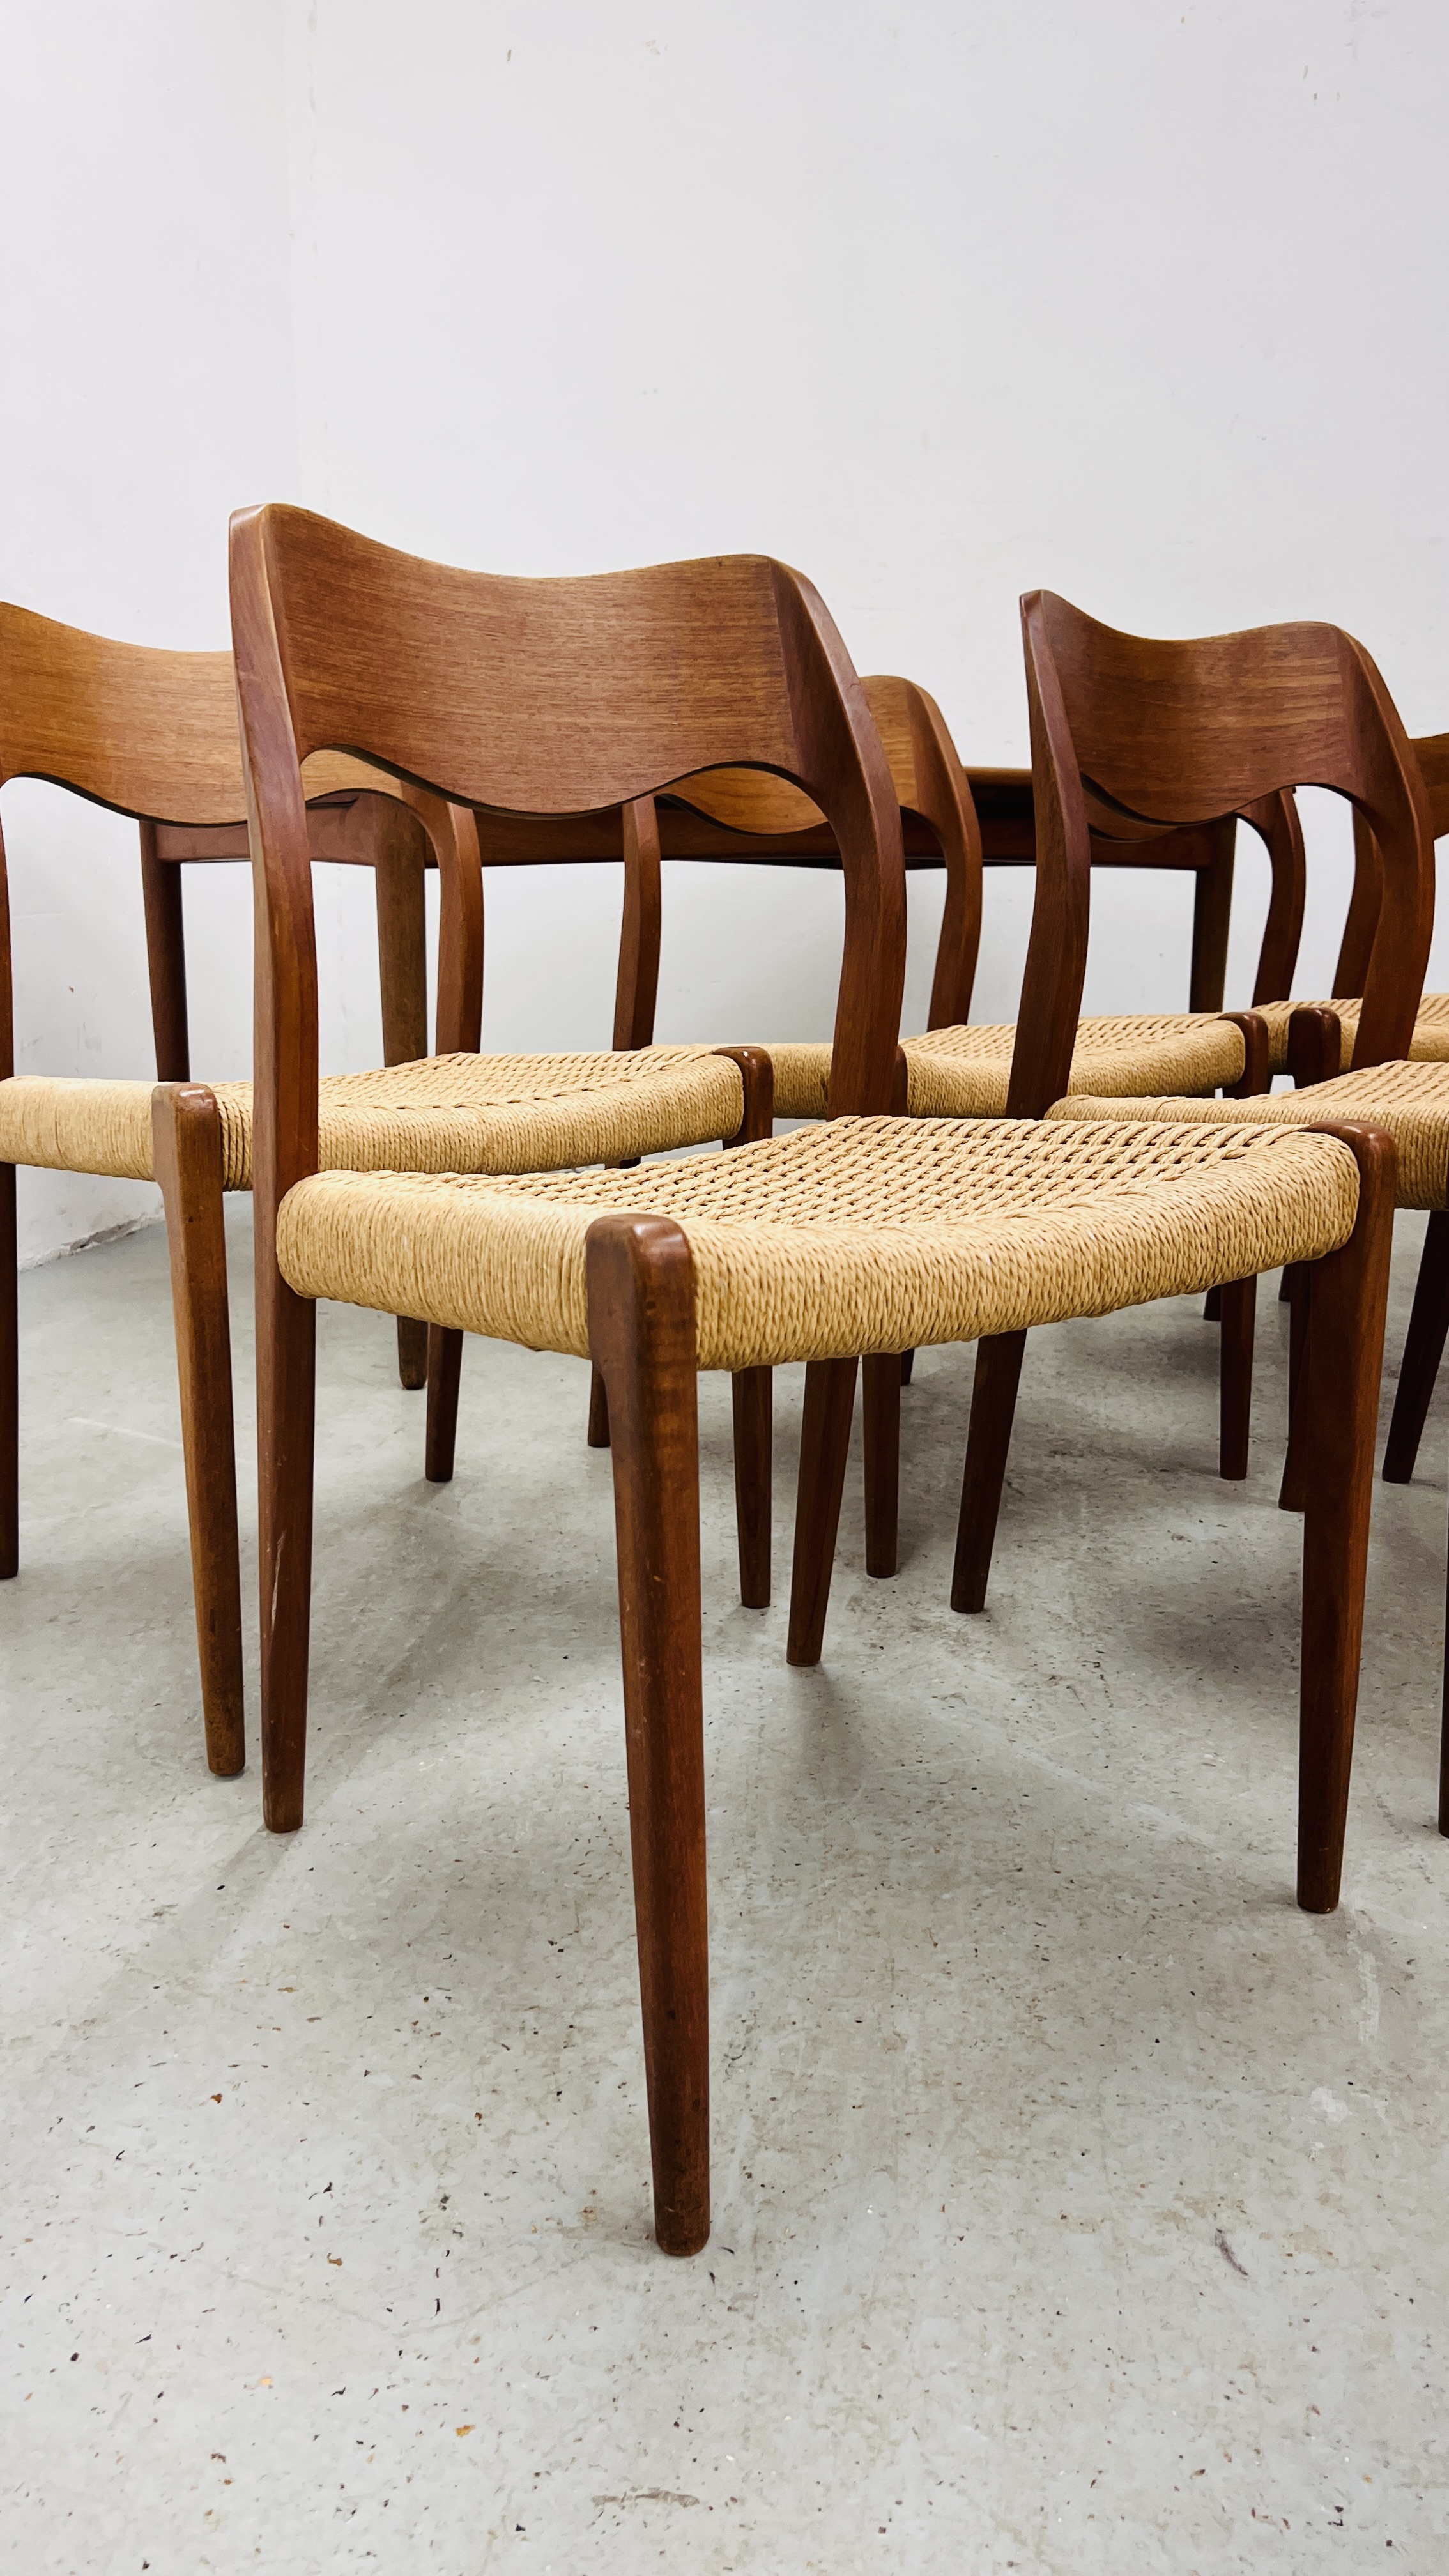 SET OF EIGHT J MOLLER DANISH TEAK DINING CHAIRS WITH WOVEN SISAL SEATS ALONG WITH A DRAWER LEAF - Image 7 of 48